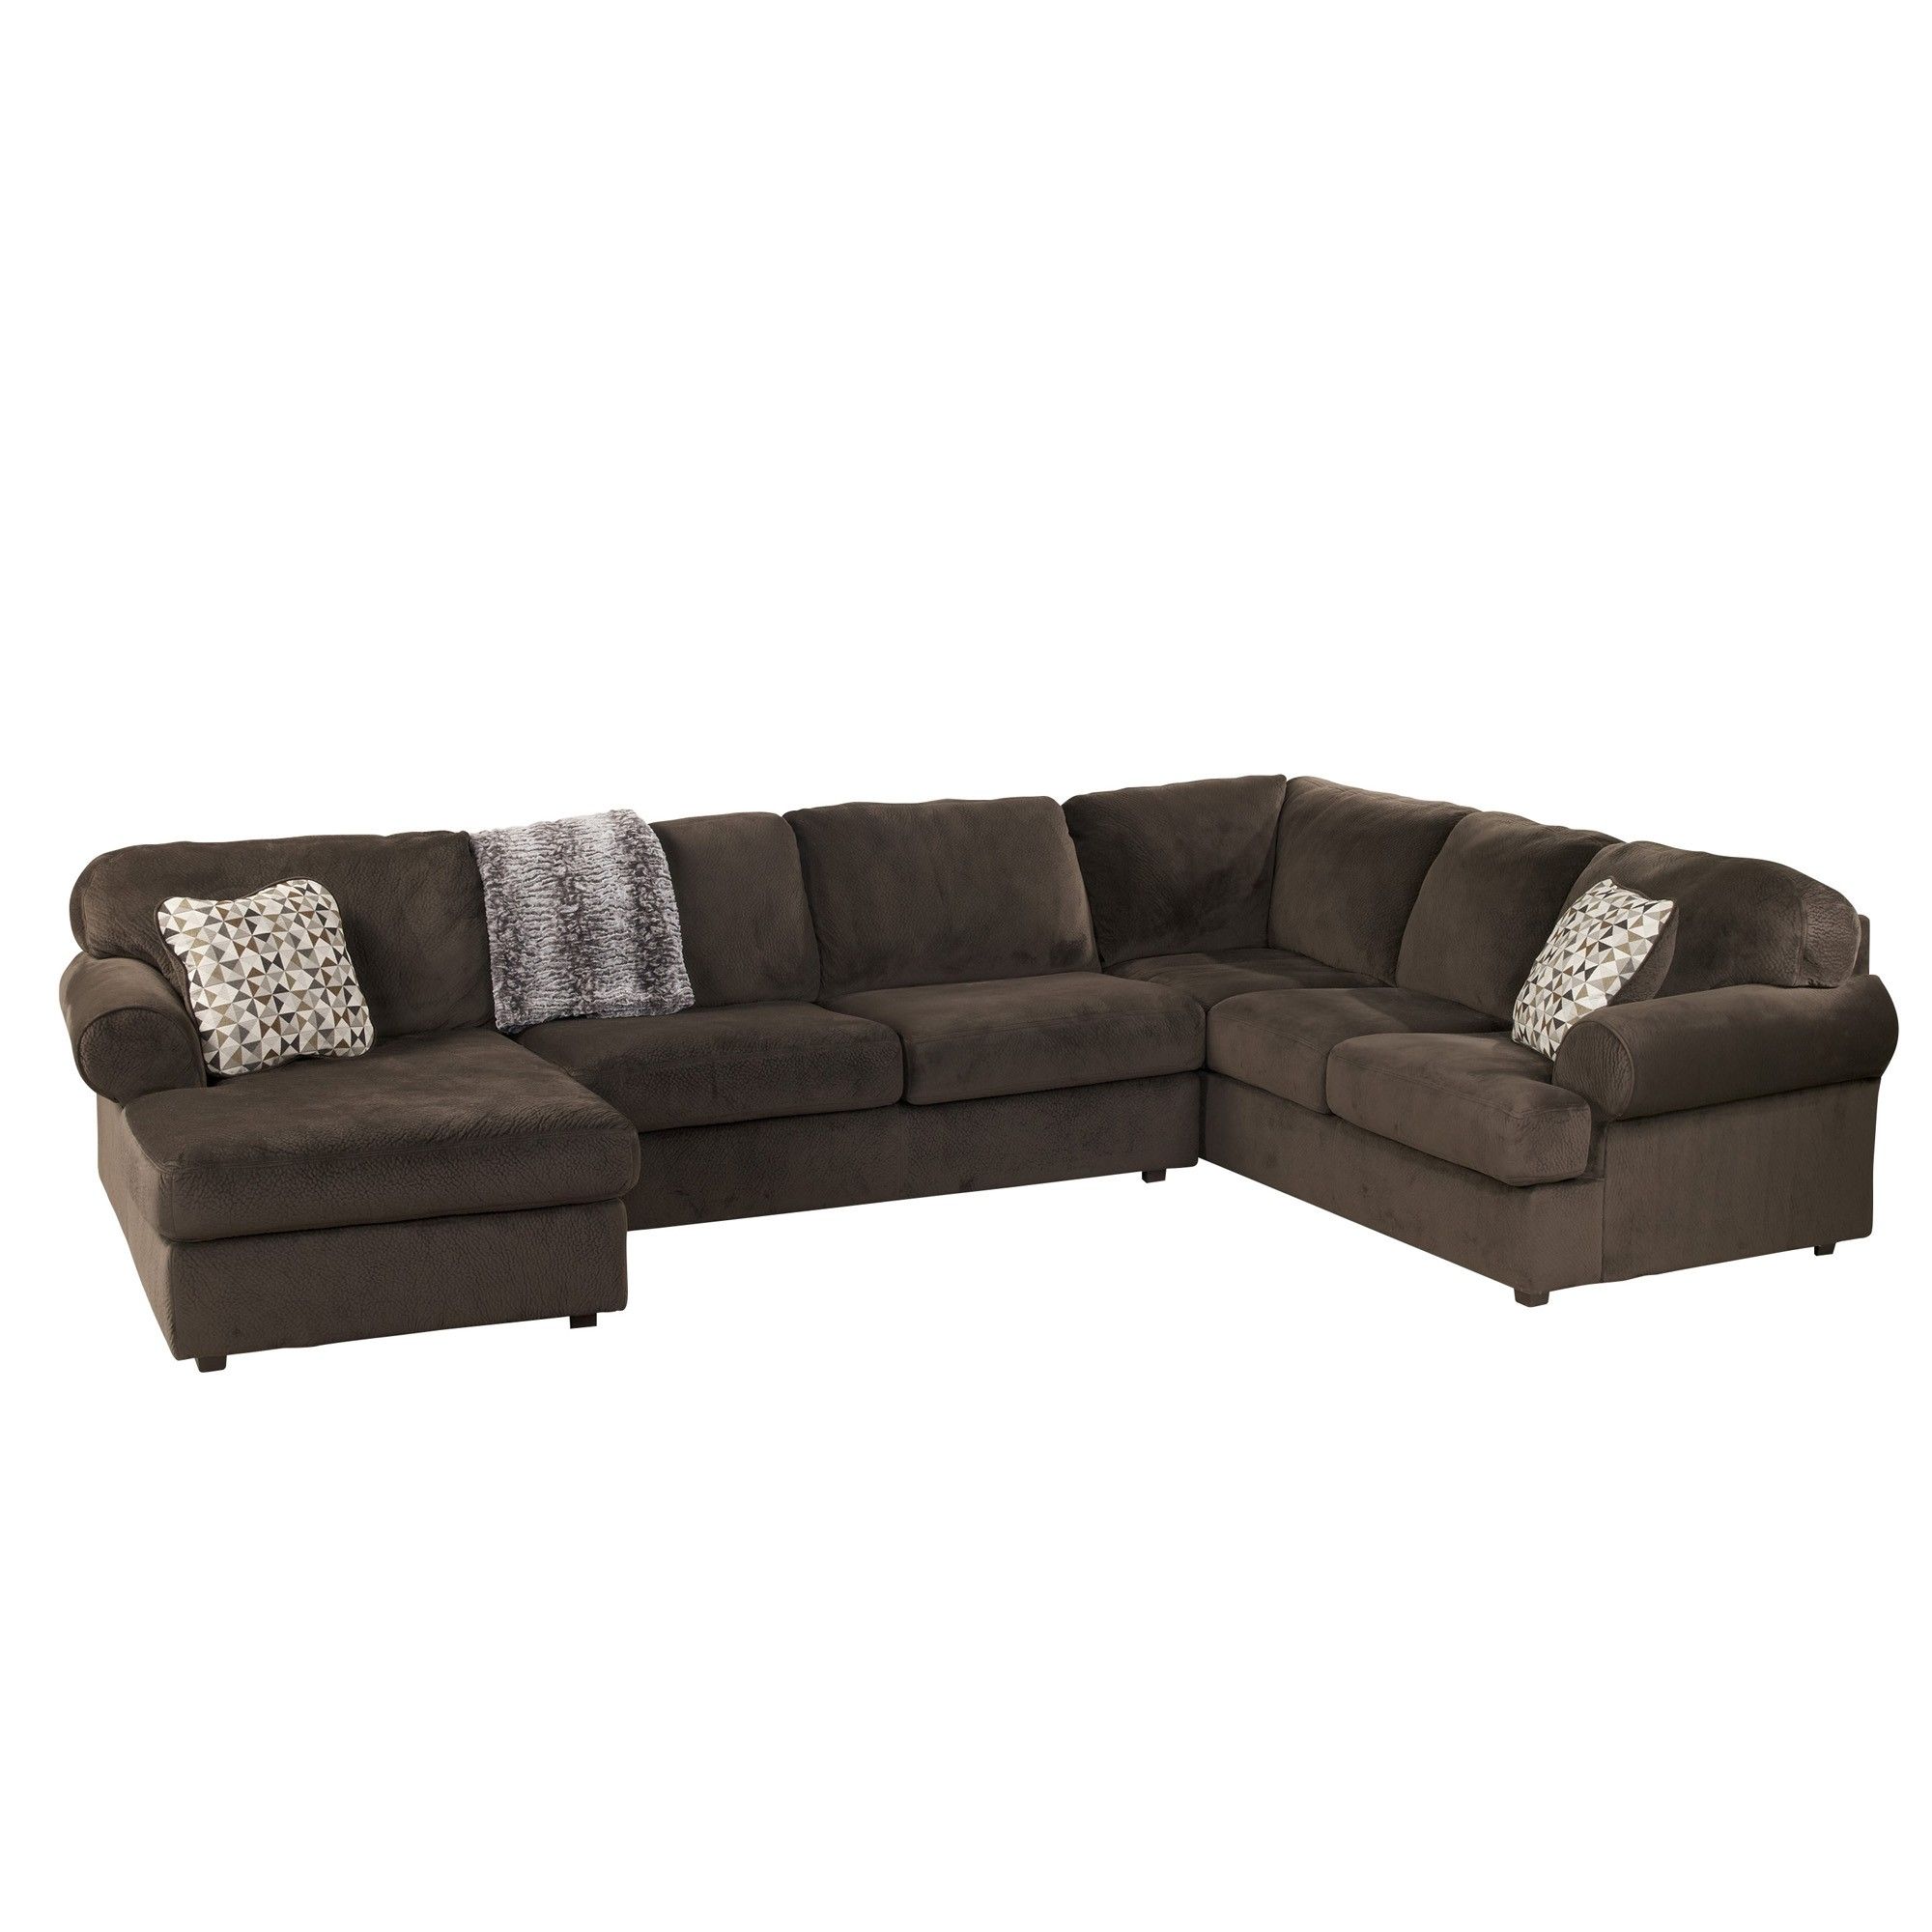 Sectionals | Tepperman's Intended For Teppermans Sectional Sofas (Photo 2 of 10)